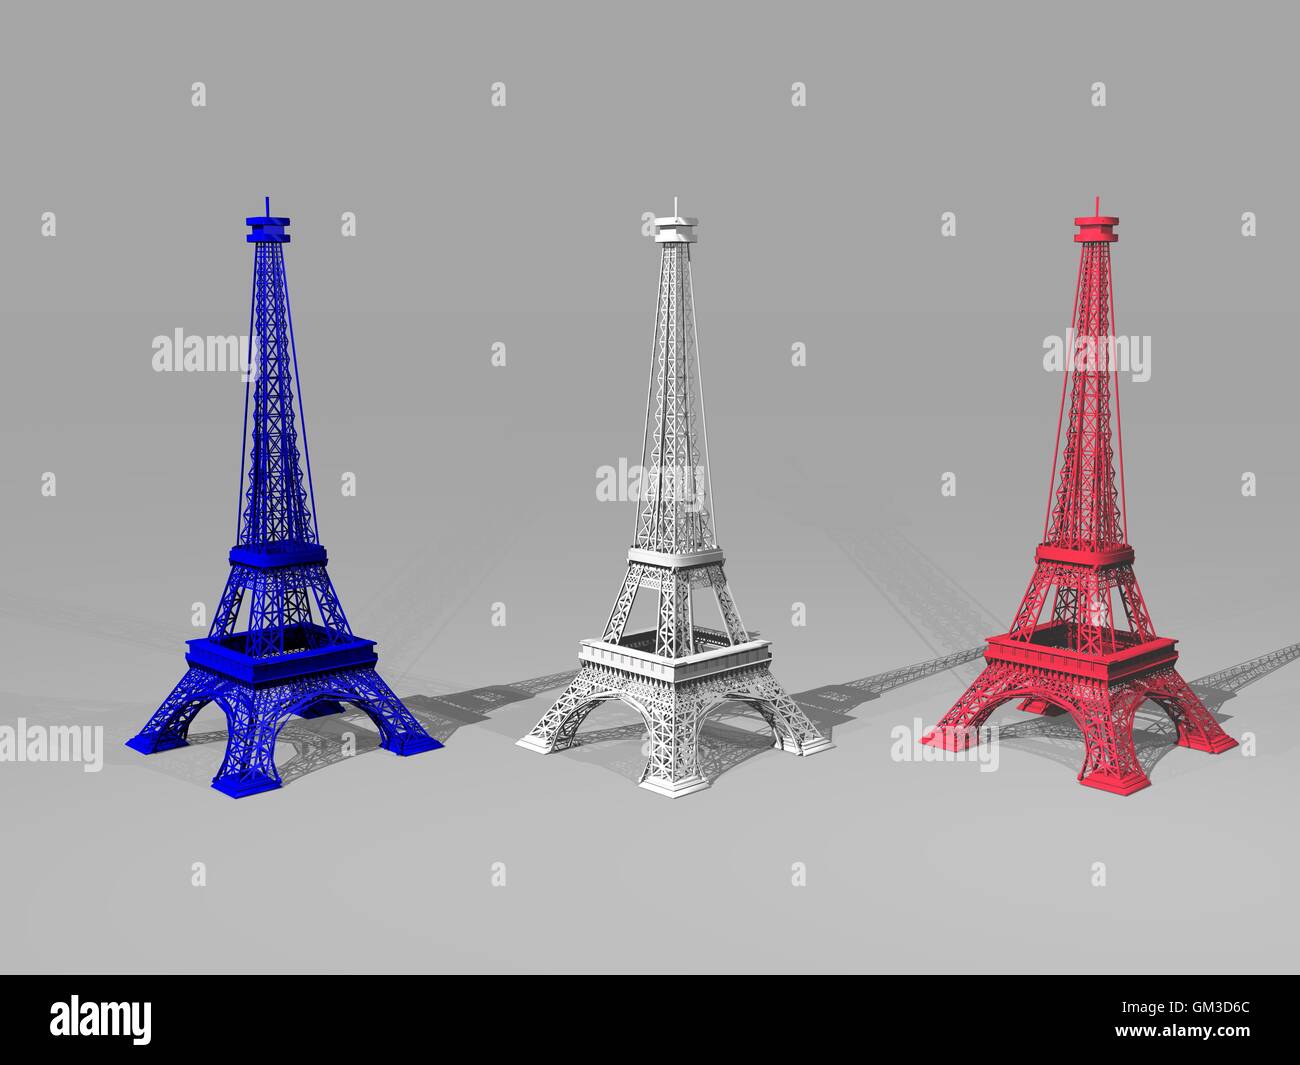 French flag colors on three Eiffel towers - 3D render Stock Photo